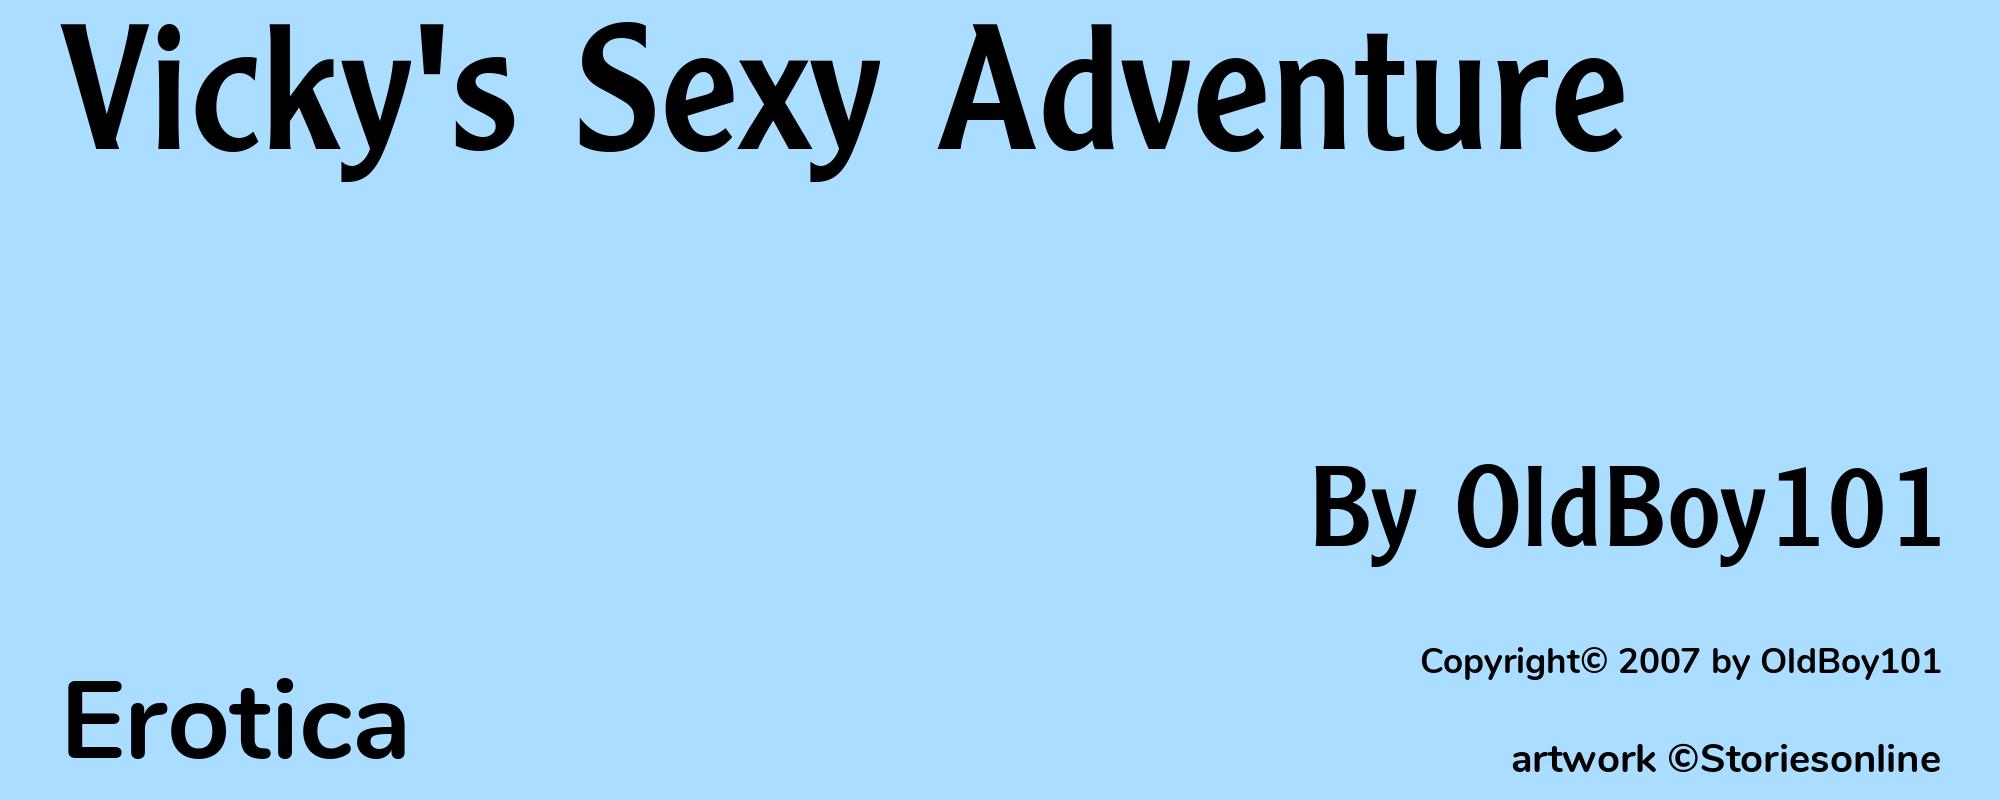 Vicky's Sexy Adventure - Cover